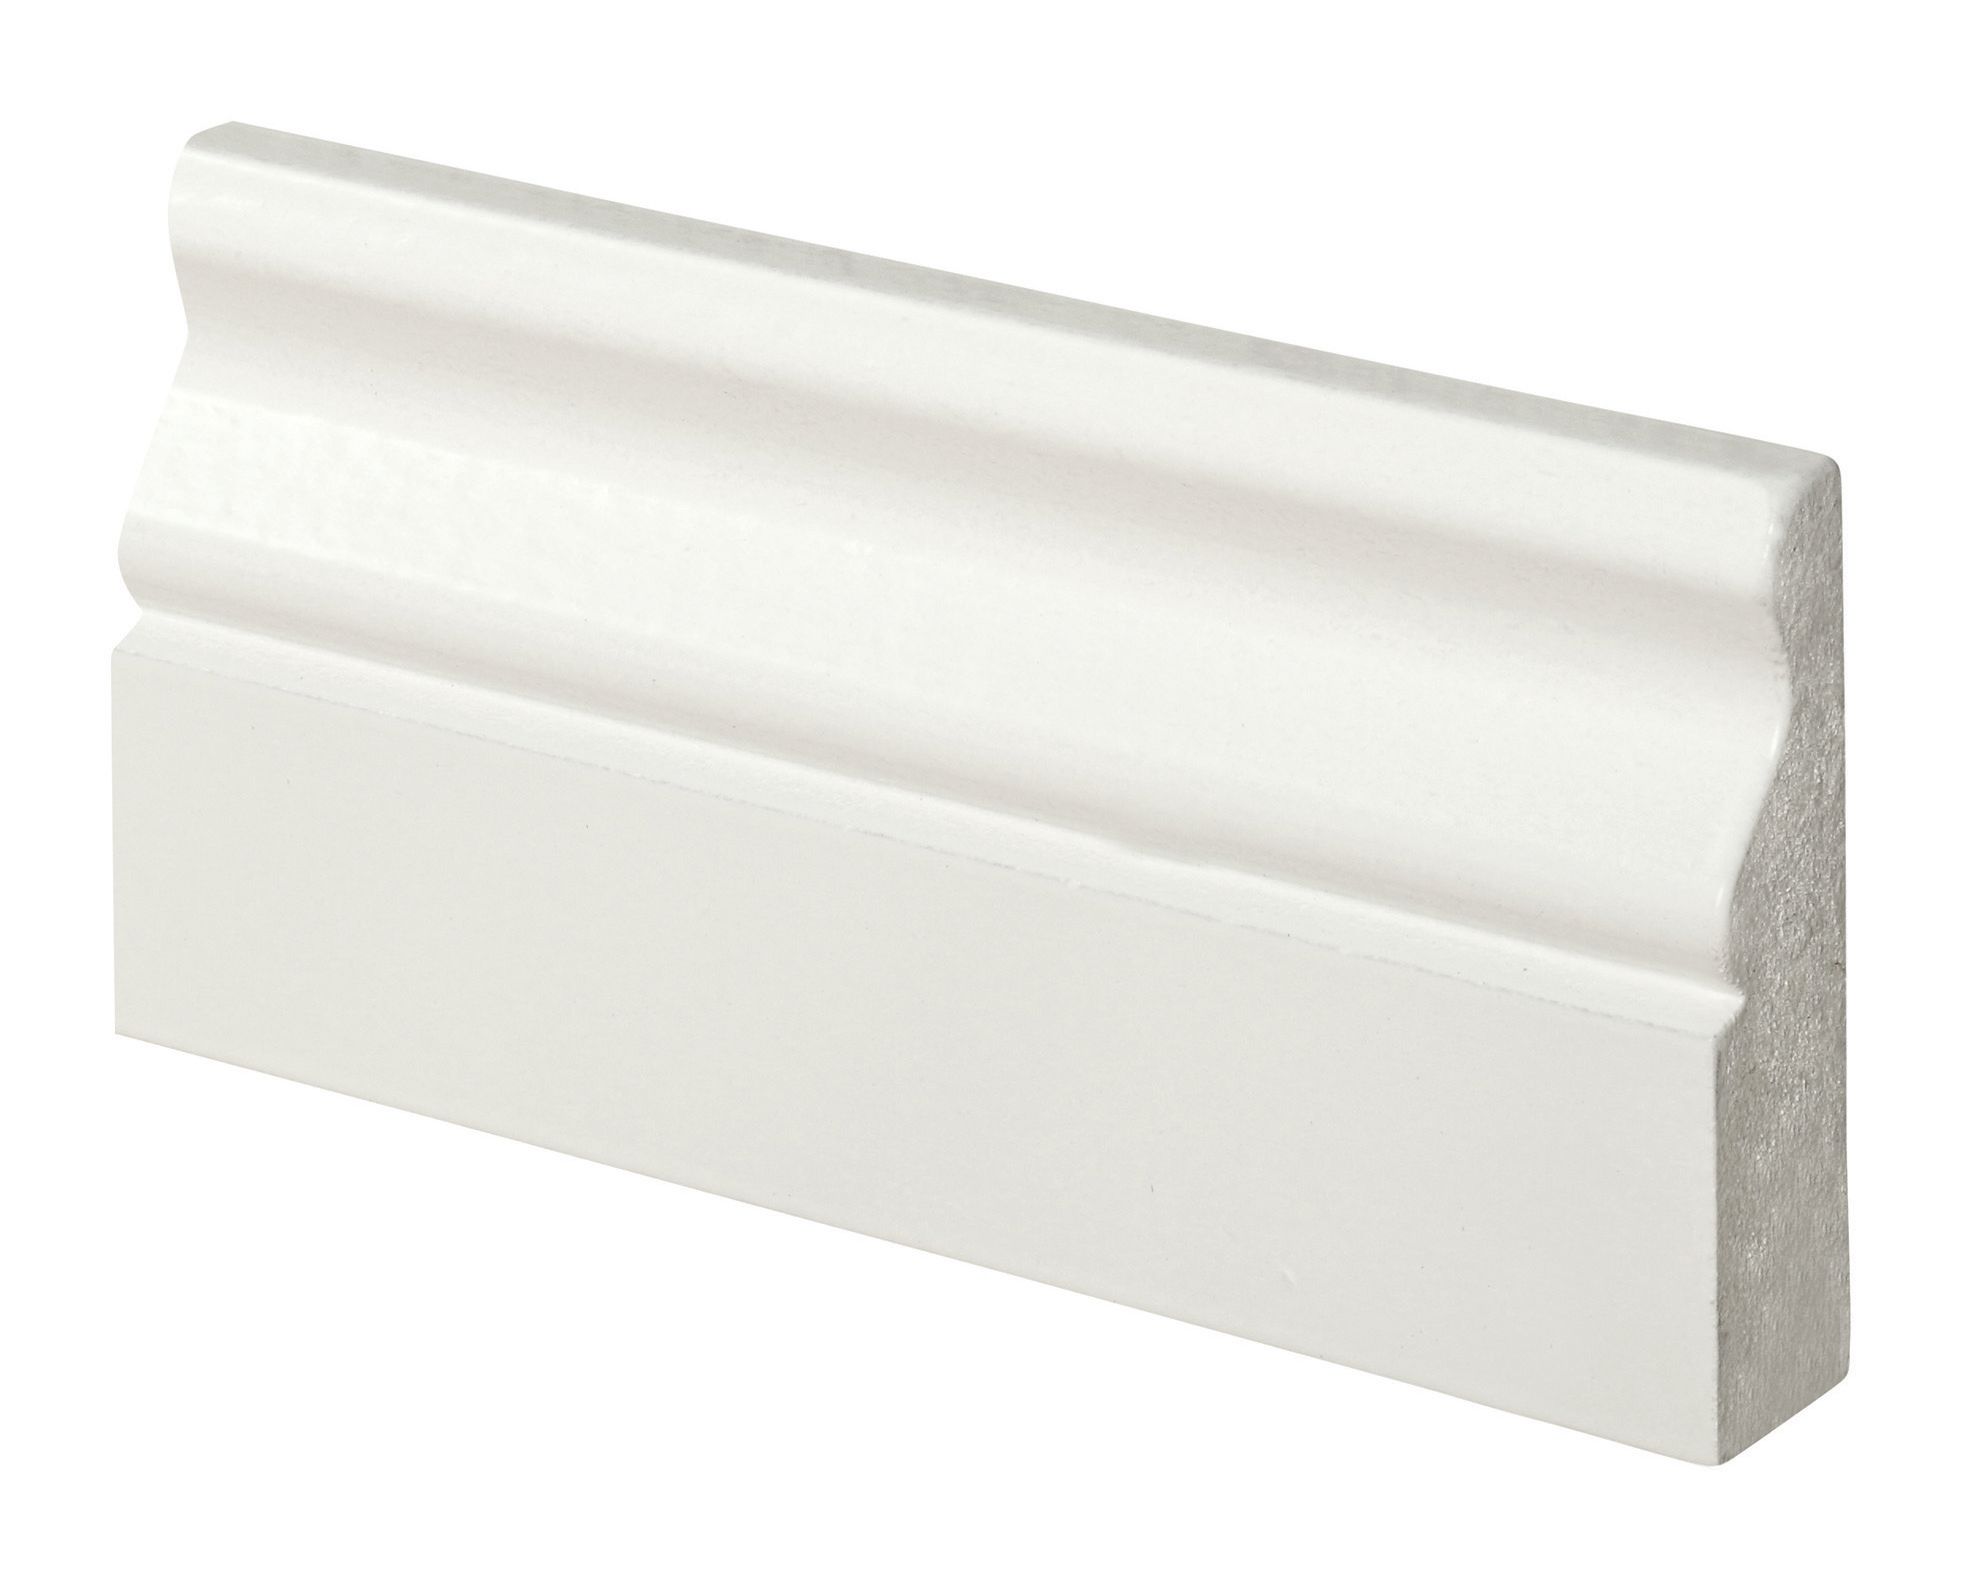 Image of Wickes Ogee Fully Finished Architrave - 18mm x 69mm x 2.1m Pack of 5